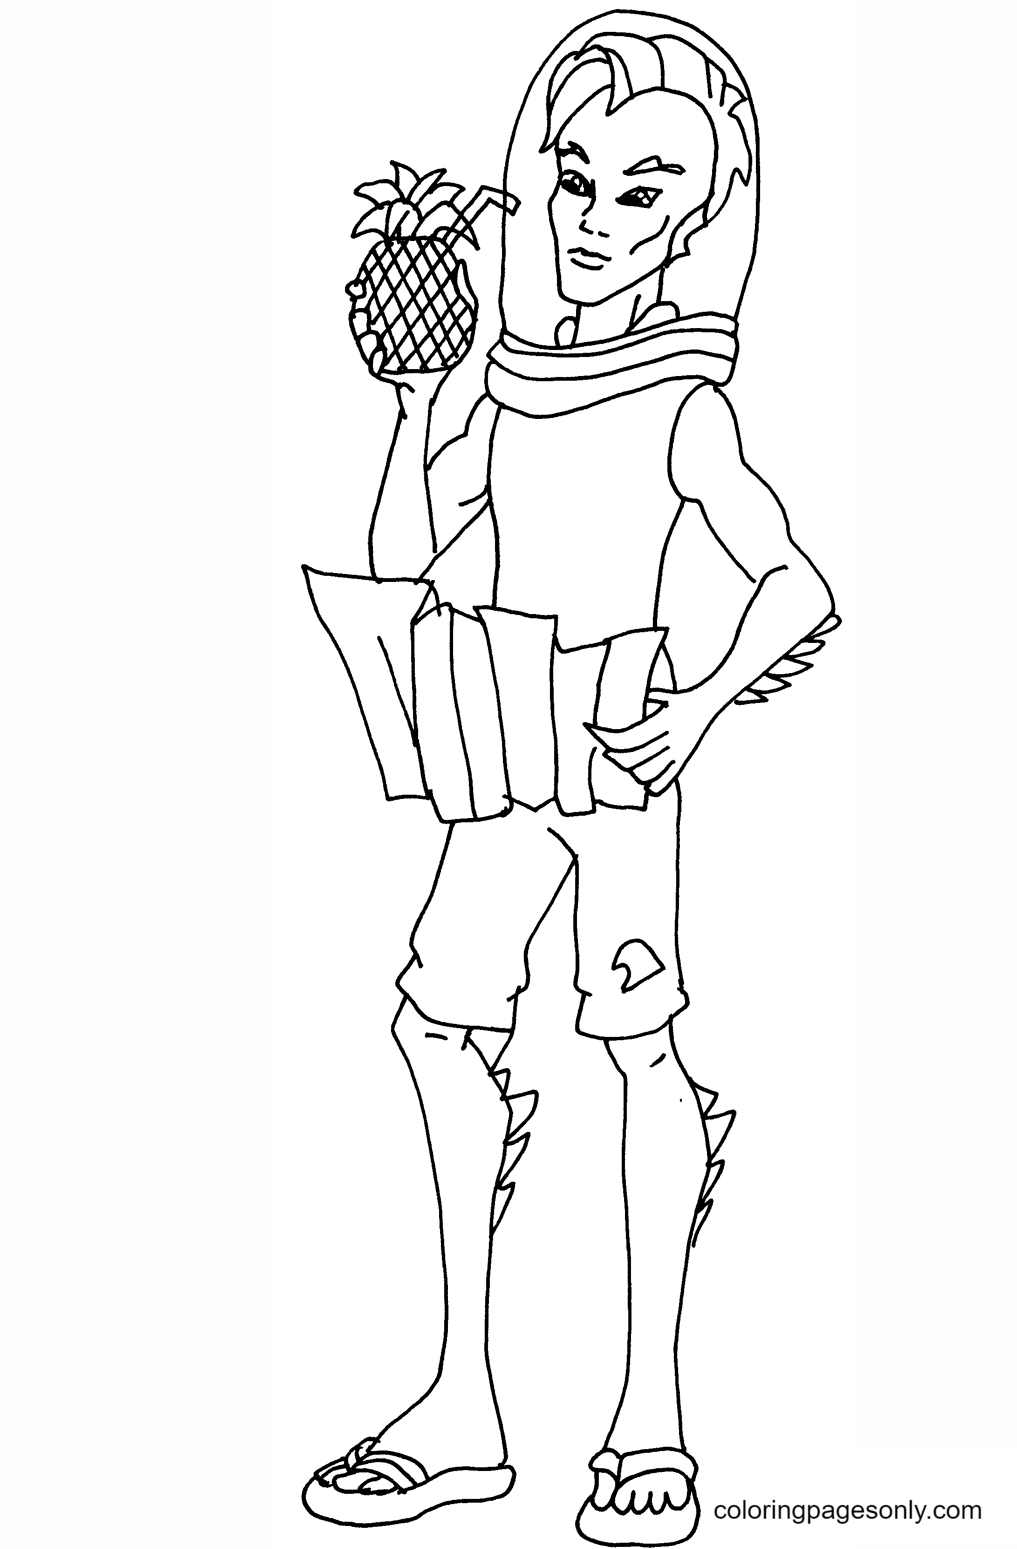 Gill Coloring Page